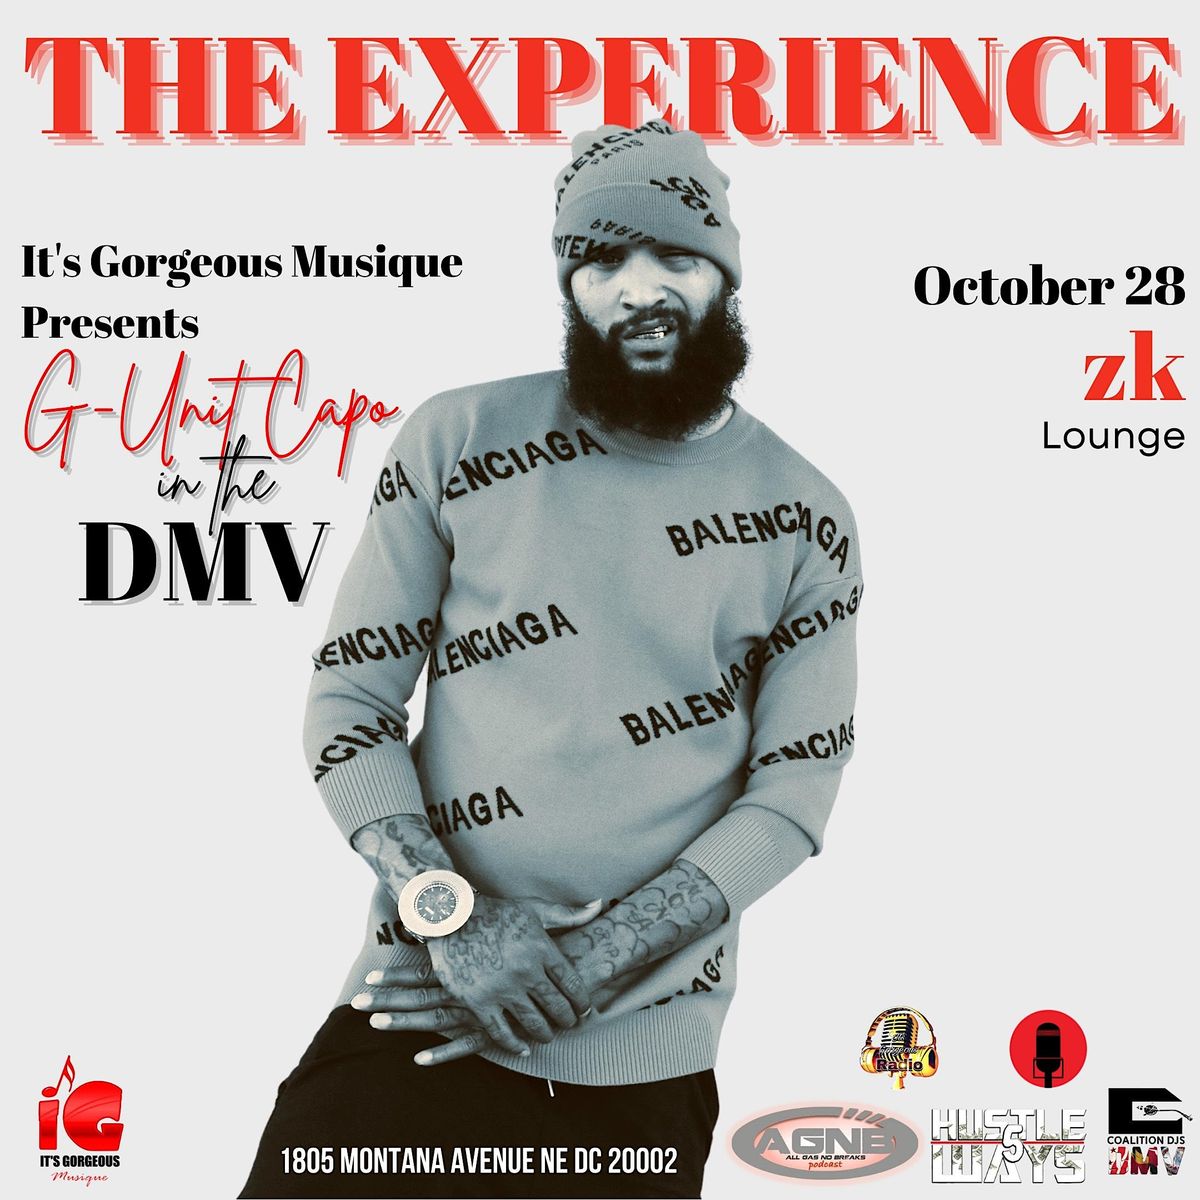 The Experience : Halloween Edition with G UNIT CAPO